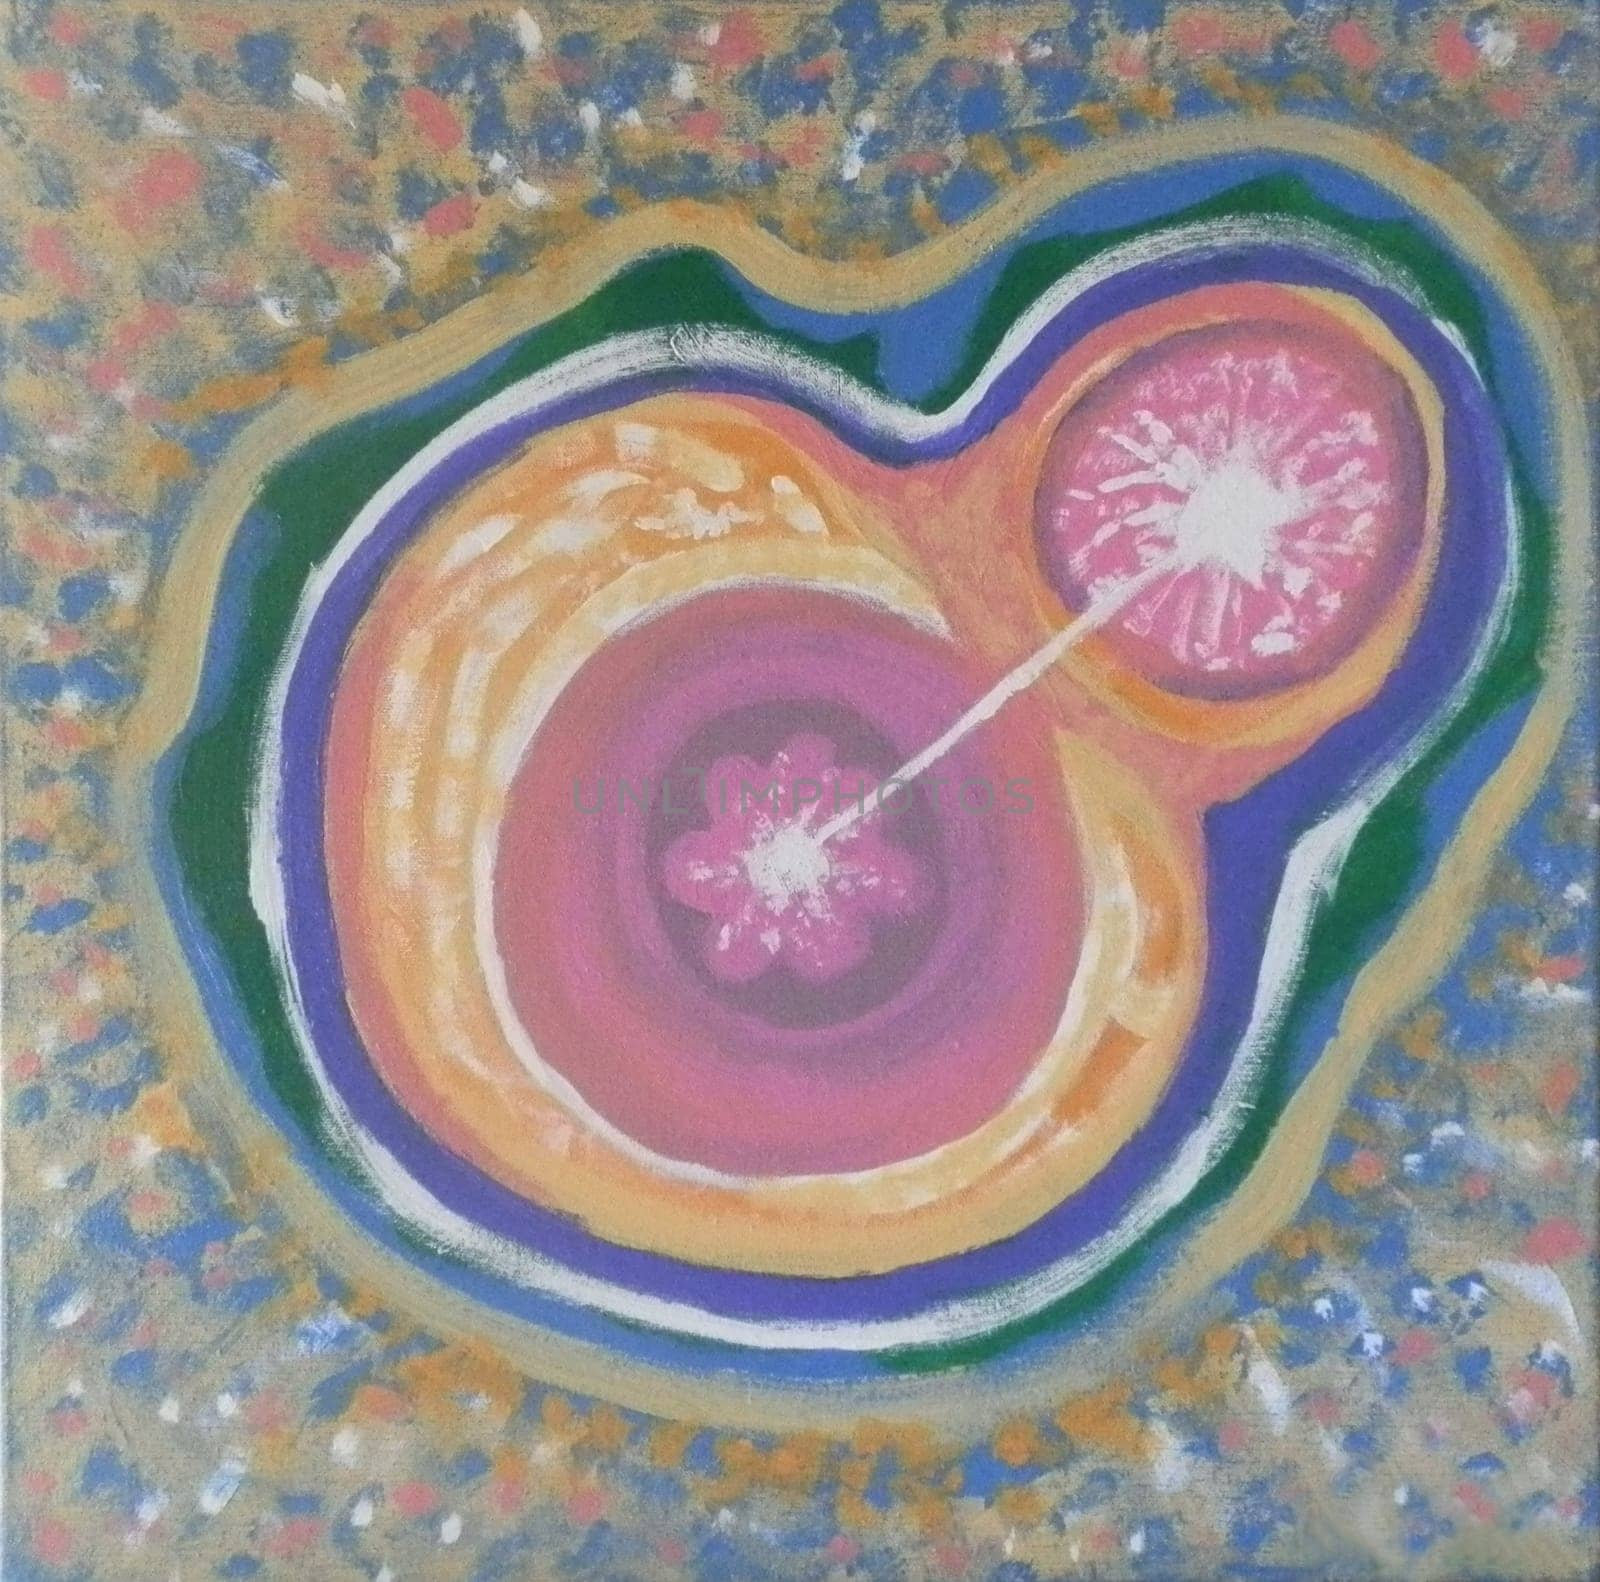 Abstract portrayal of a fetus in the mother's womb gathering intelligence from the mother's central nervous system in a sheltered, protected setting.